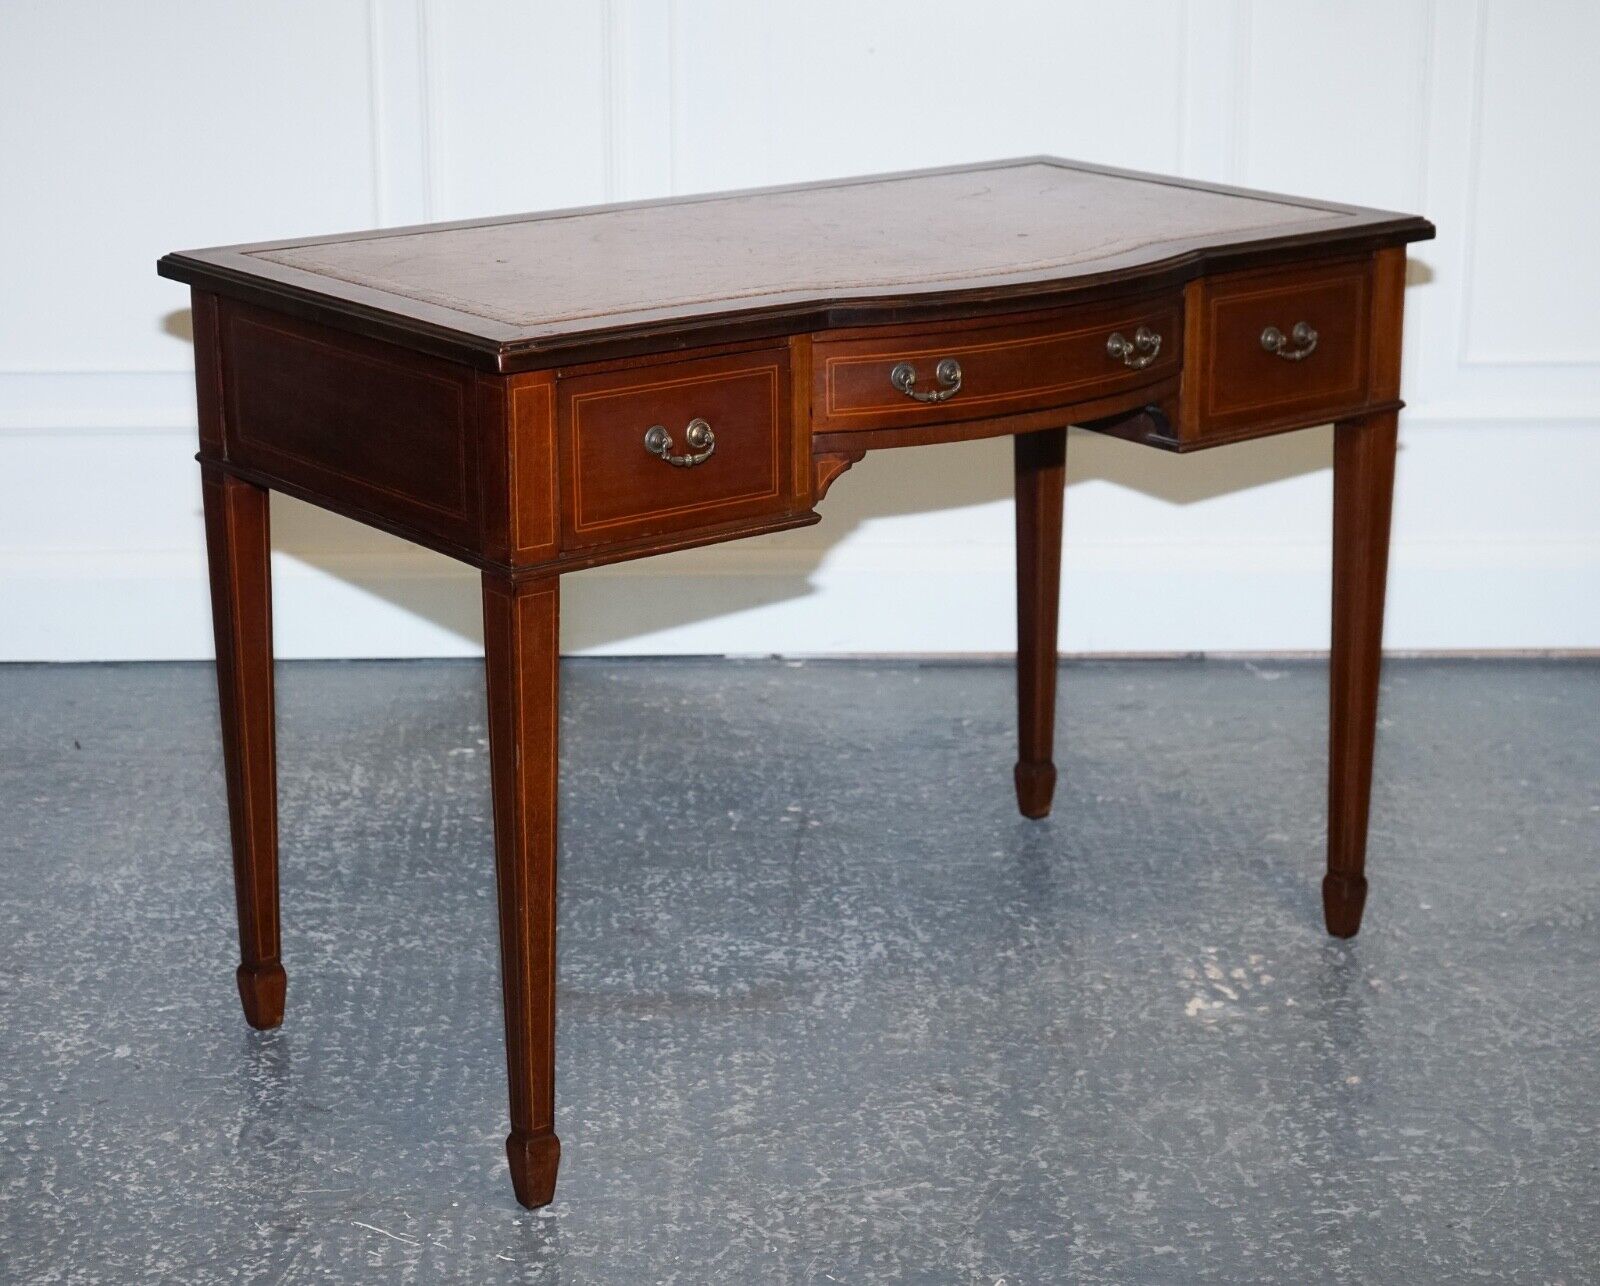 EDWARDIAN 1880s STAMPED MAPLE & CO BROWN LEATHER SHERATON WRITING DESK TABLE